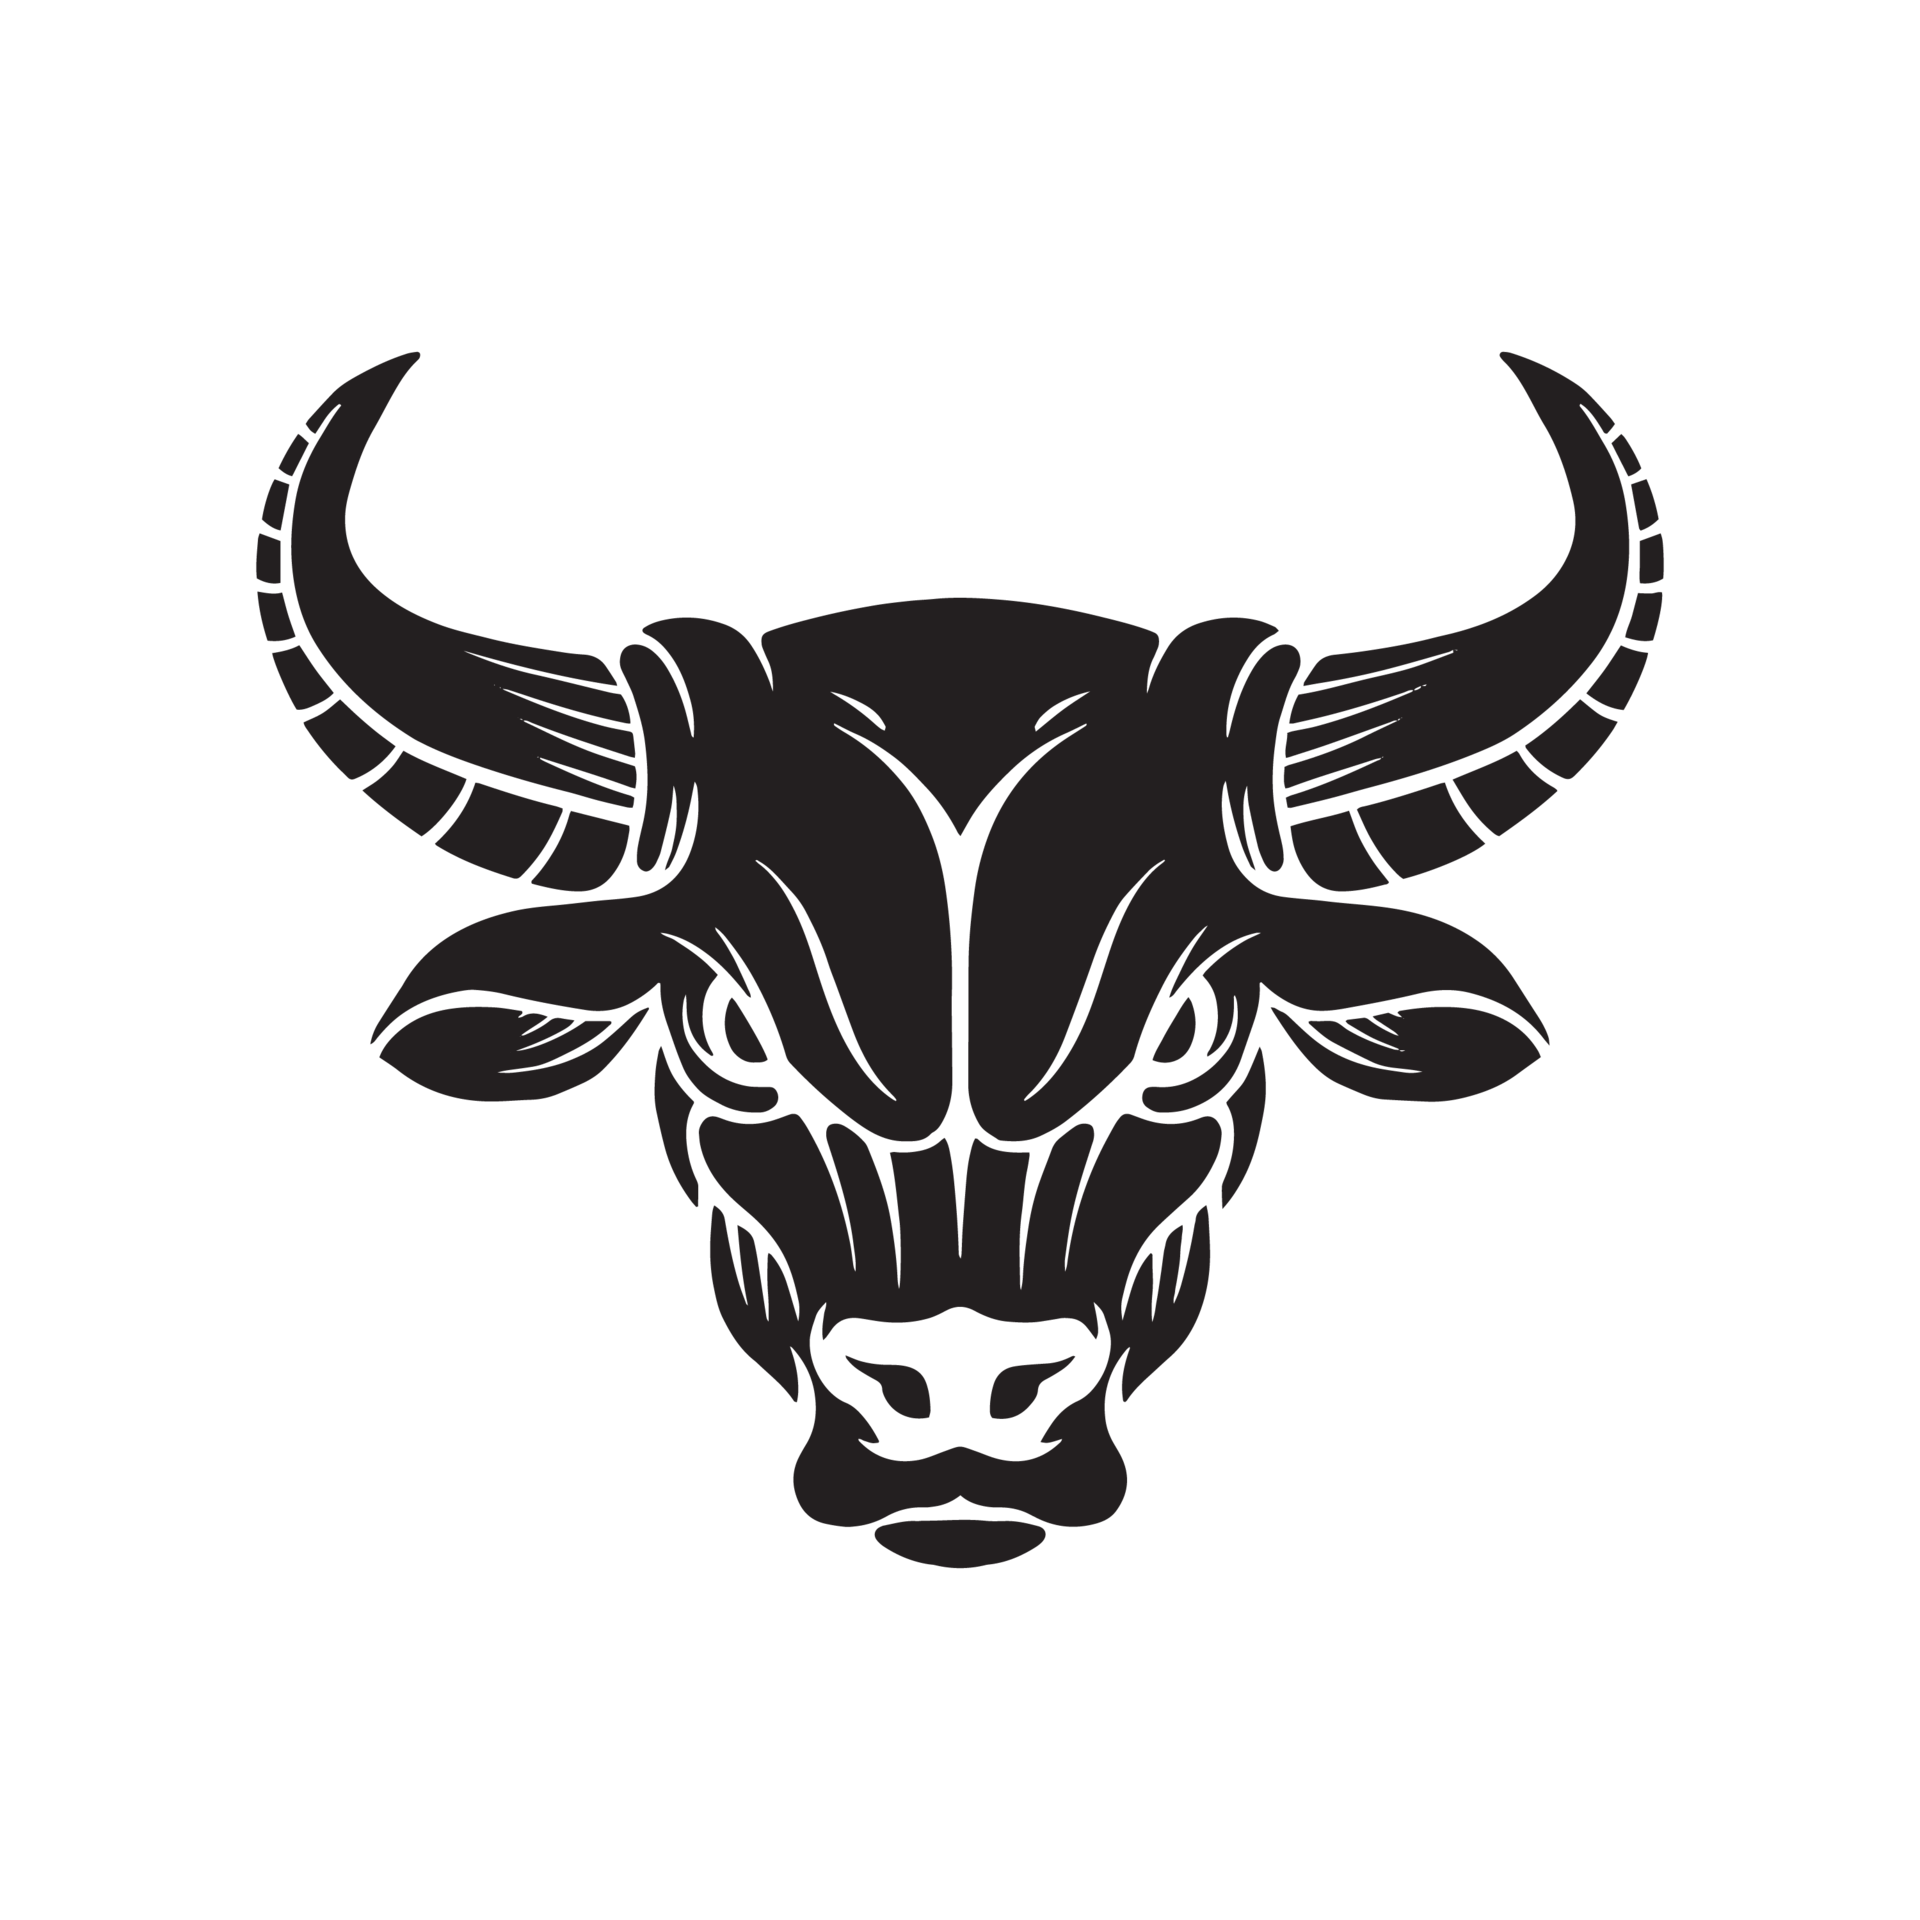 Professional Bull Riders (PBR) Logo, symbol, meaning, history, PNG, brand